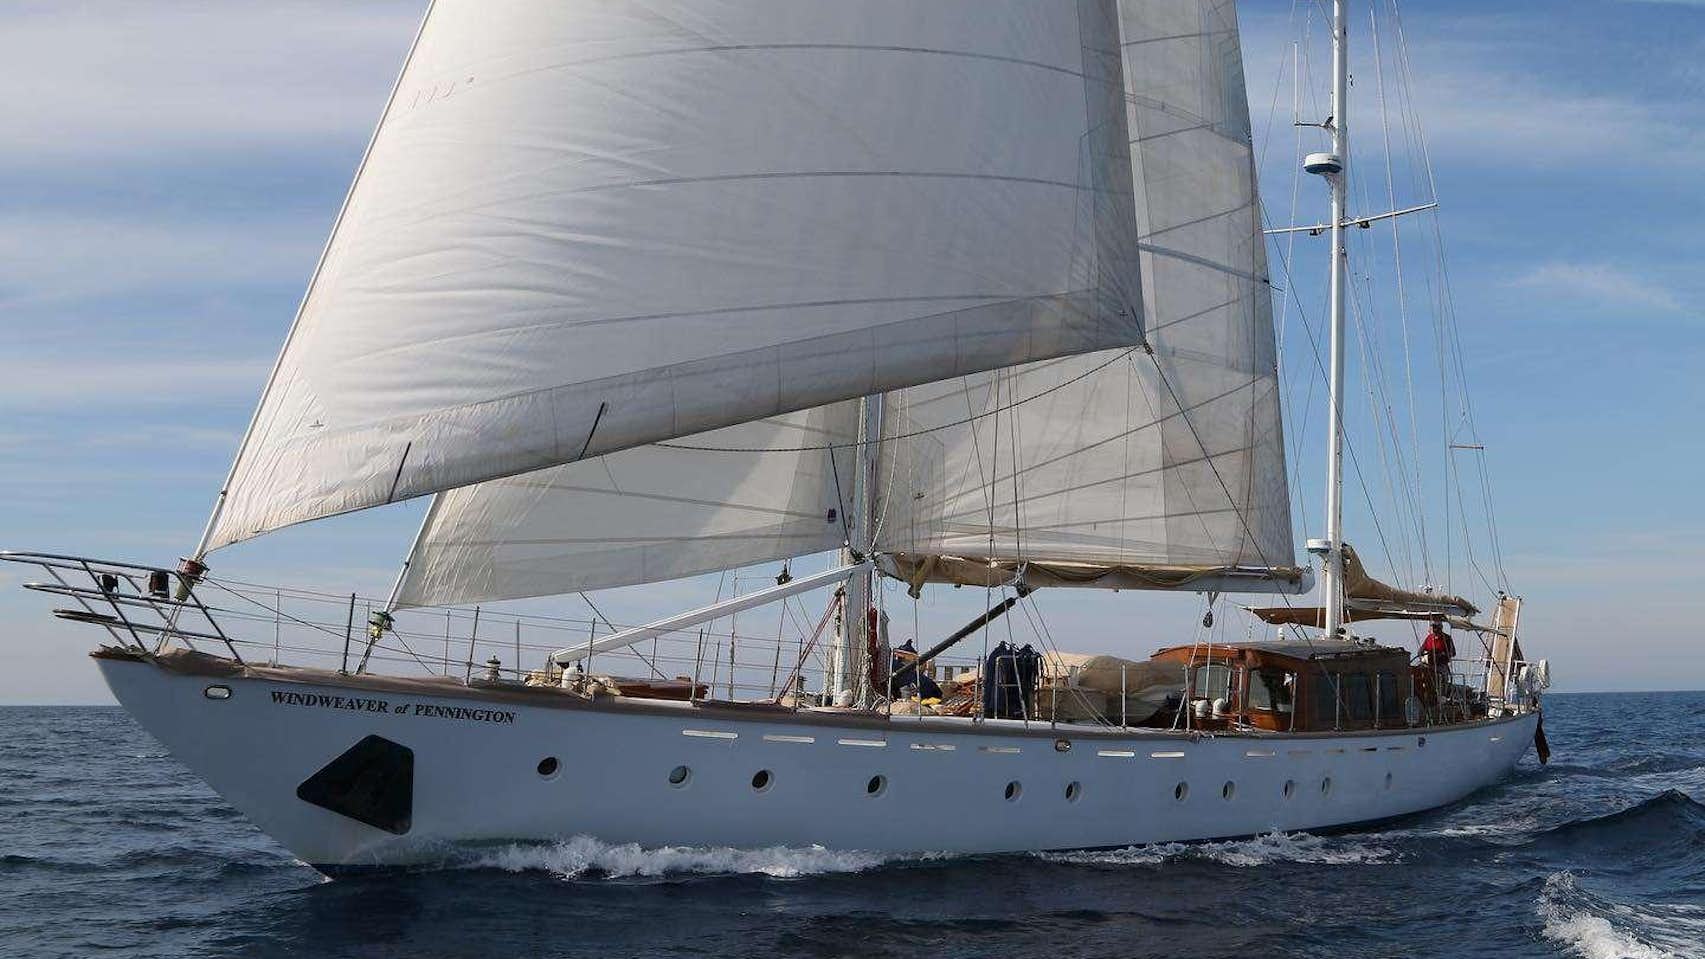 Watch Video for WINDWEAVER OF PENNINGTON Yacht for Charter